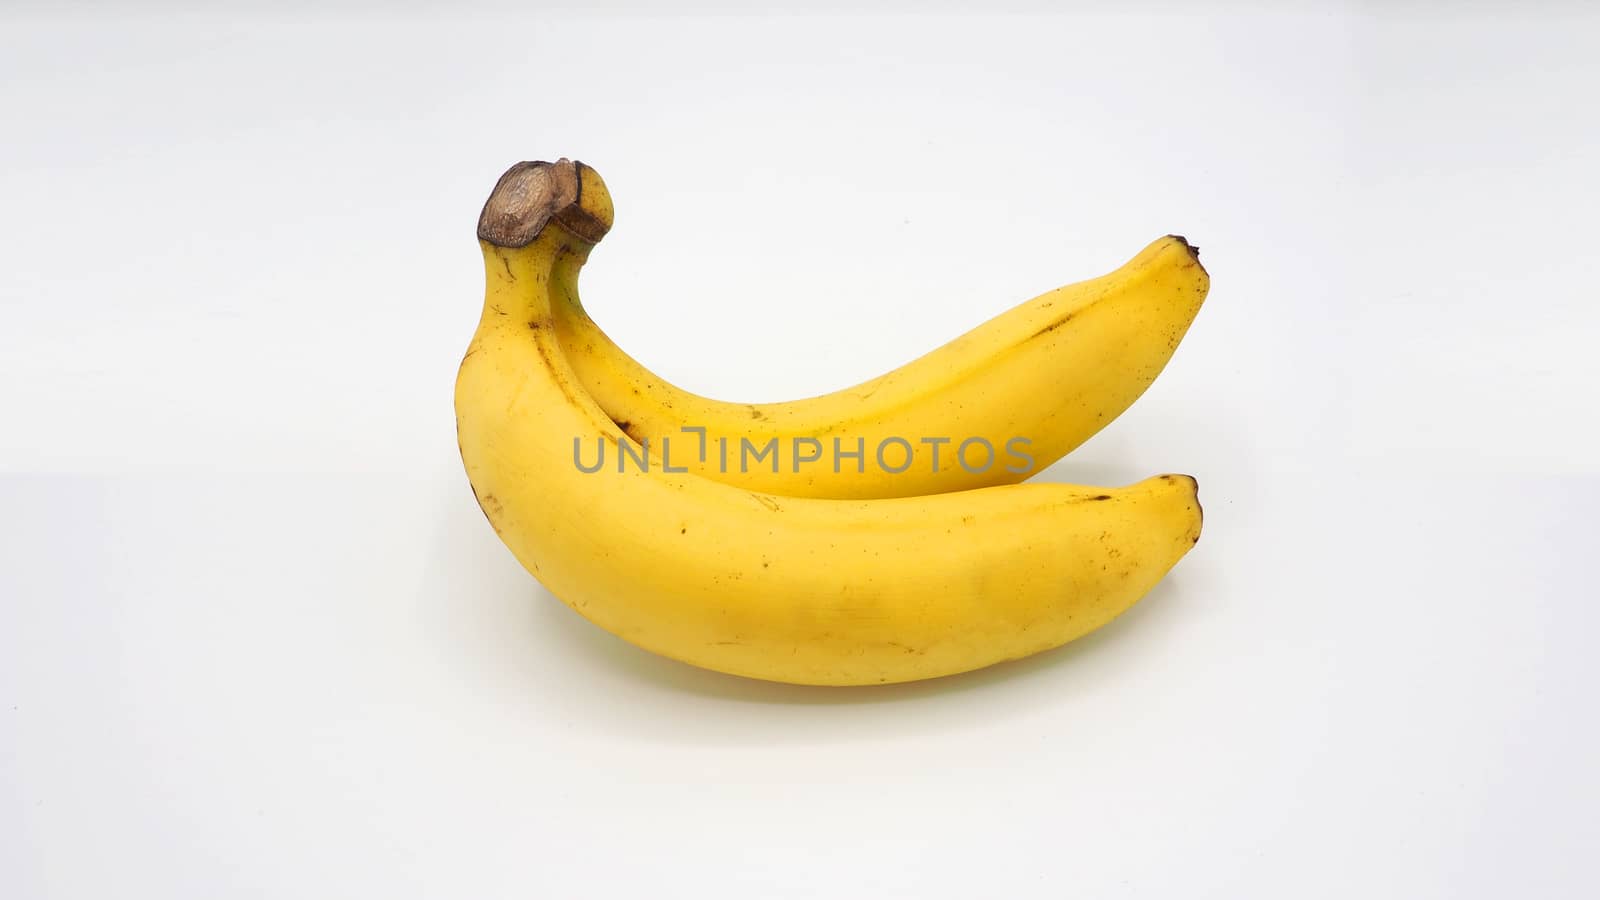 Real two yellow banana from Bangkok Thailand no retouch and white background studio shot and isolated.